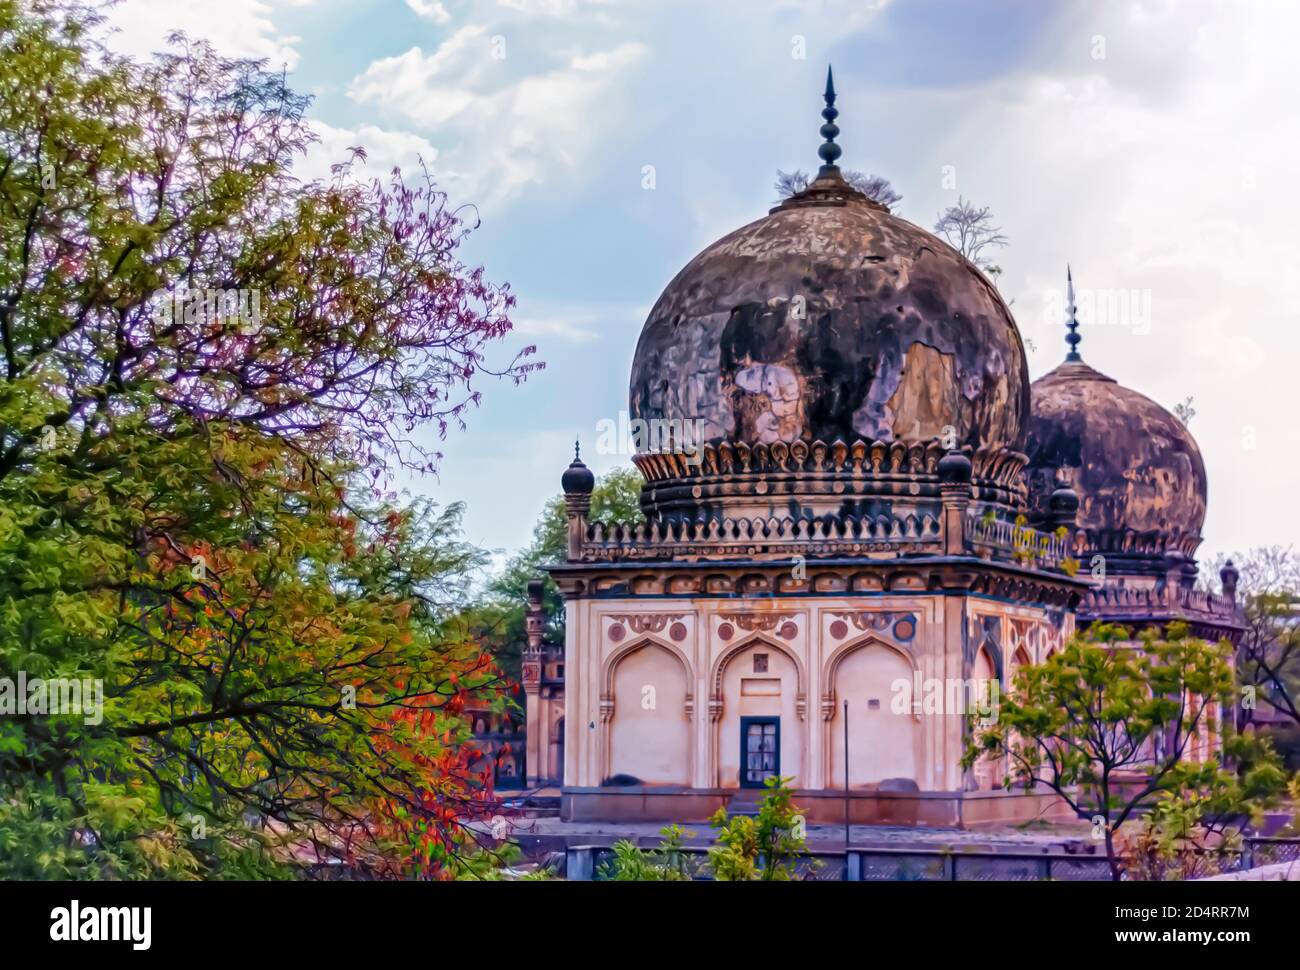 Il mausoleo di Hayat Bakshi Begum nel complesso delle Tombe Qutb Shahi situato a Ibrahim Bagh a Hyderabad, India. Foto Stock